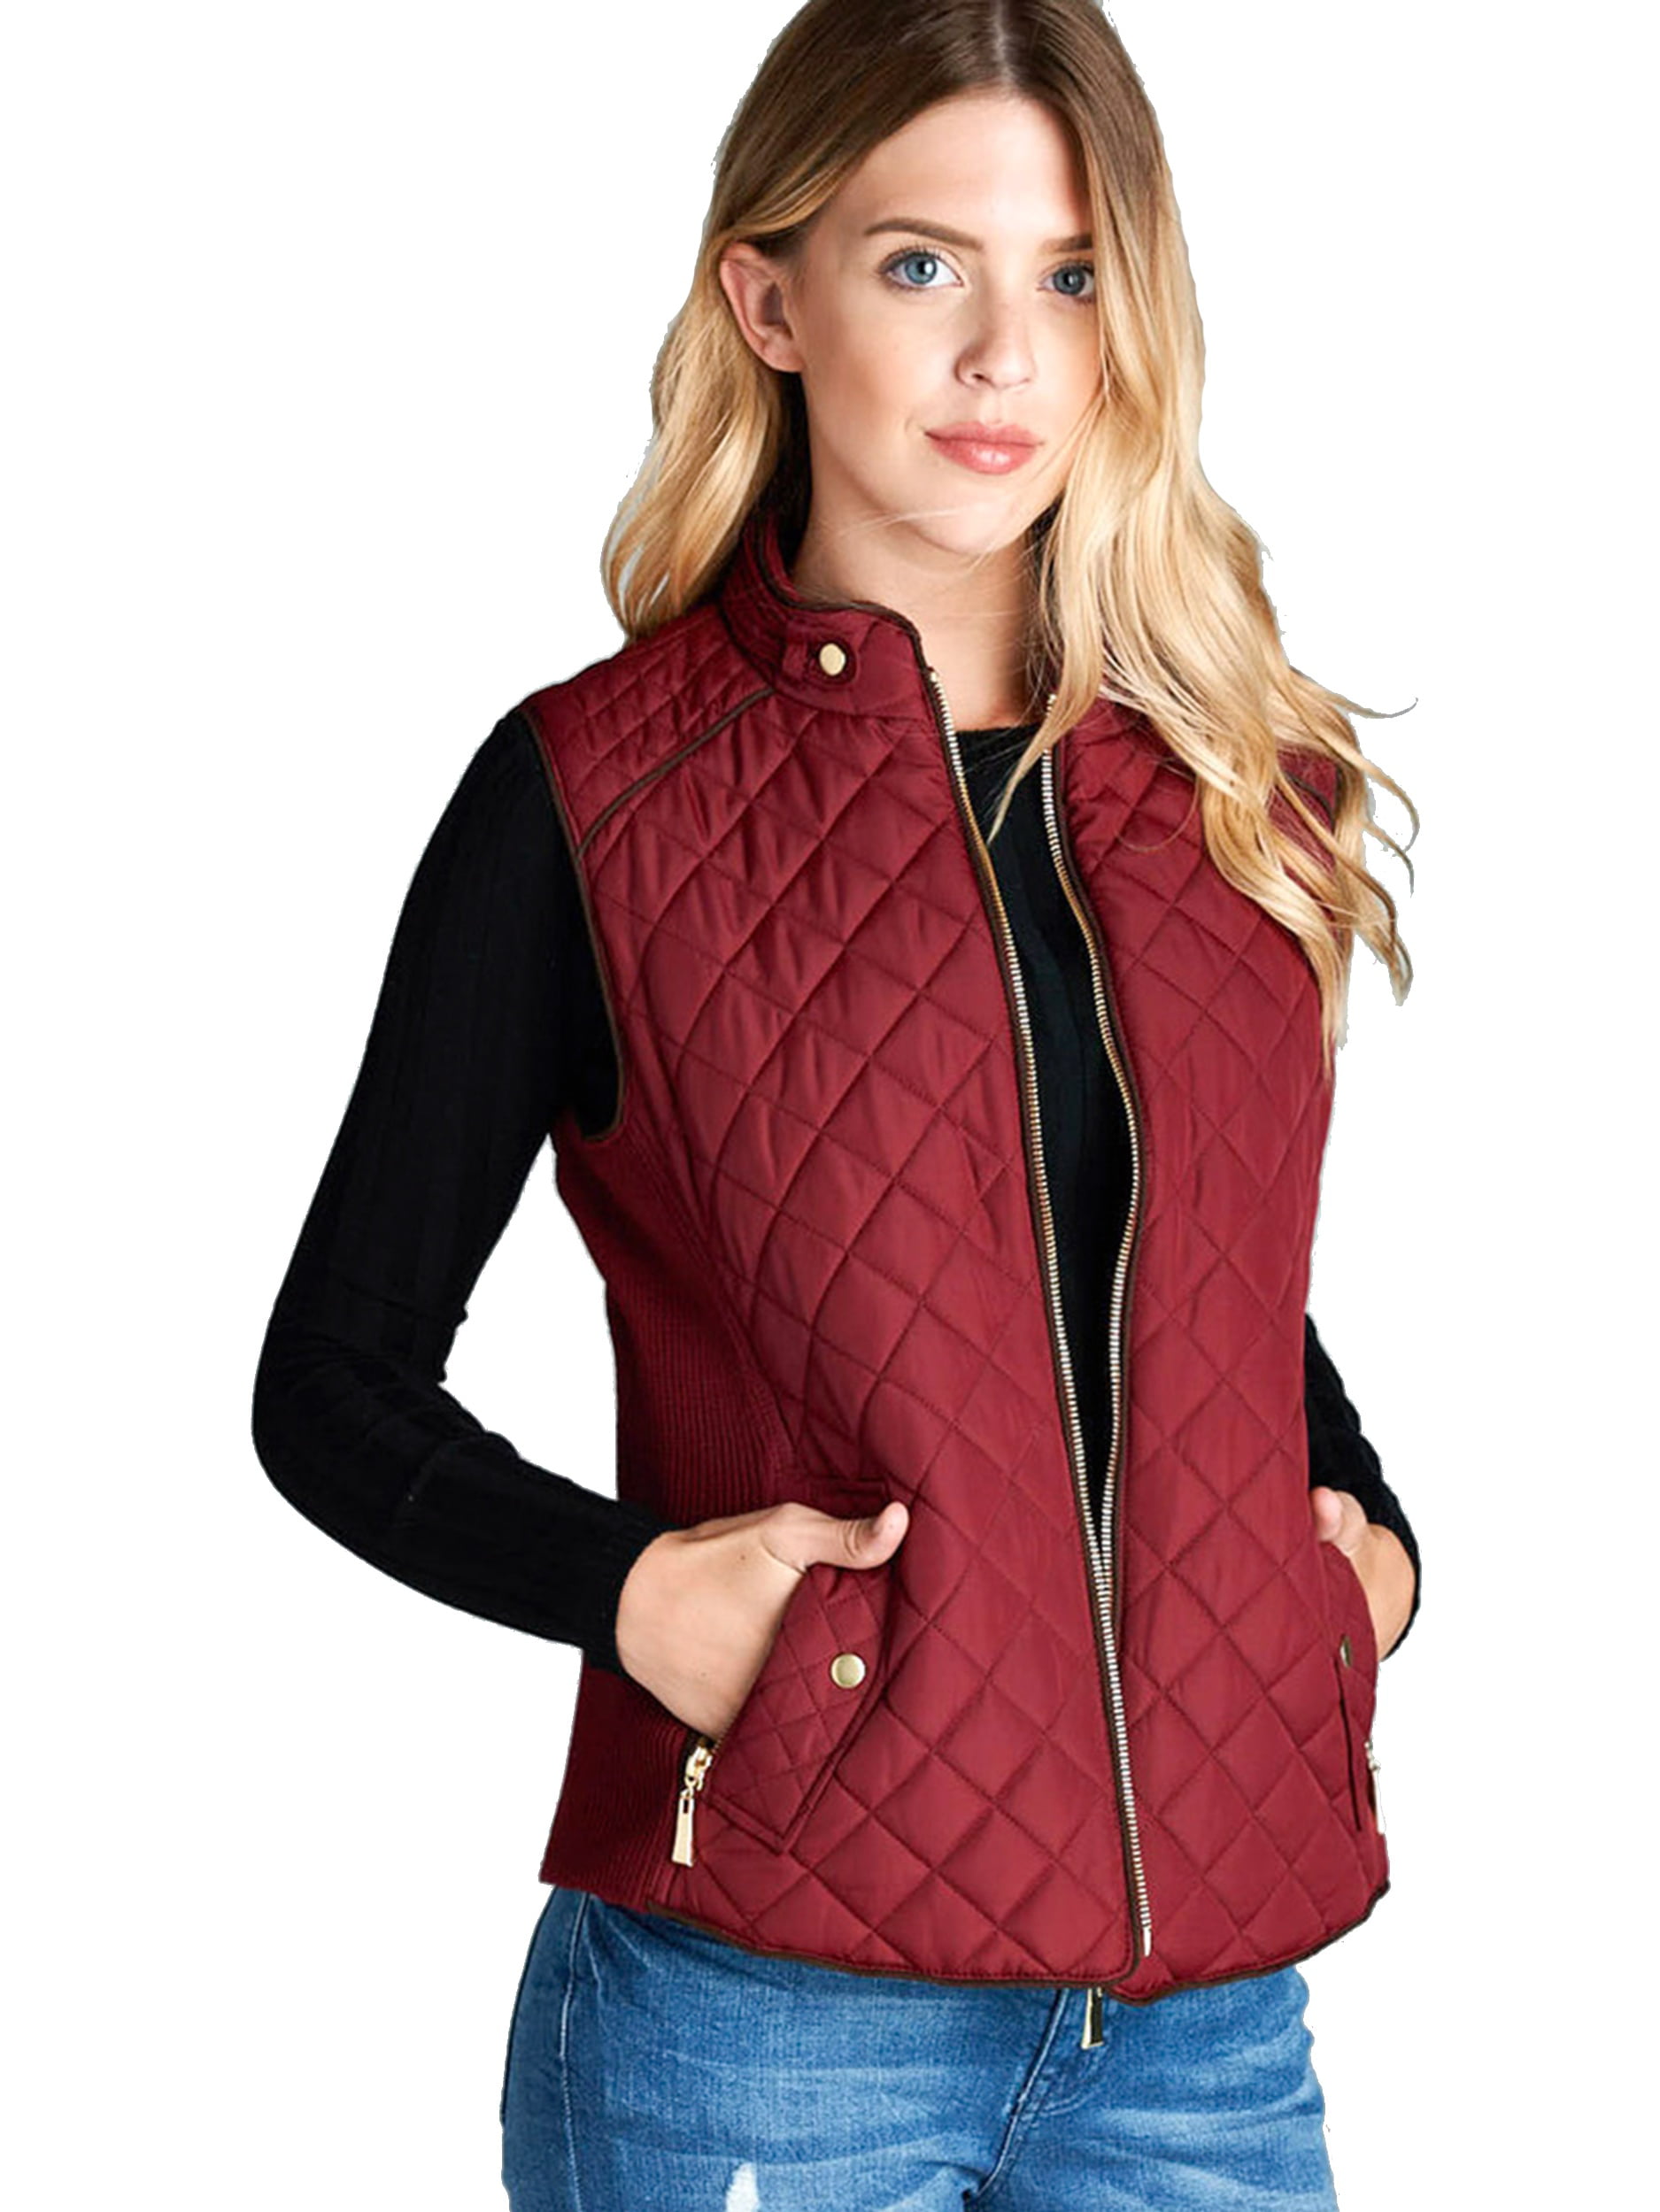 SNJ Women's Lightweight Quilted Padding Zip Up Jacket